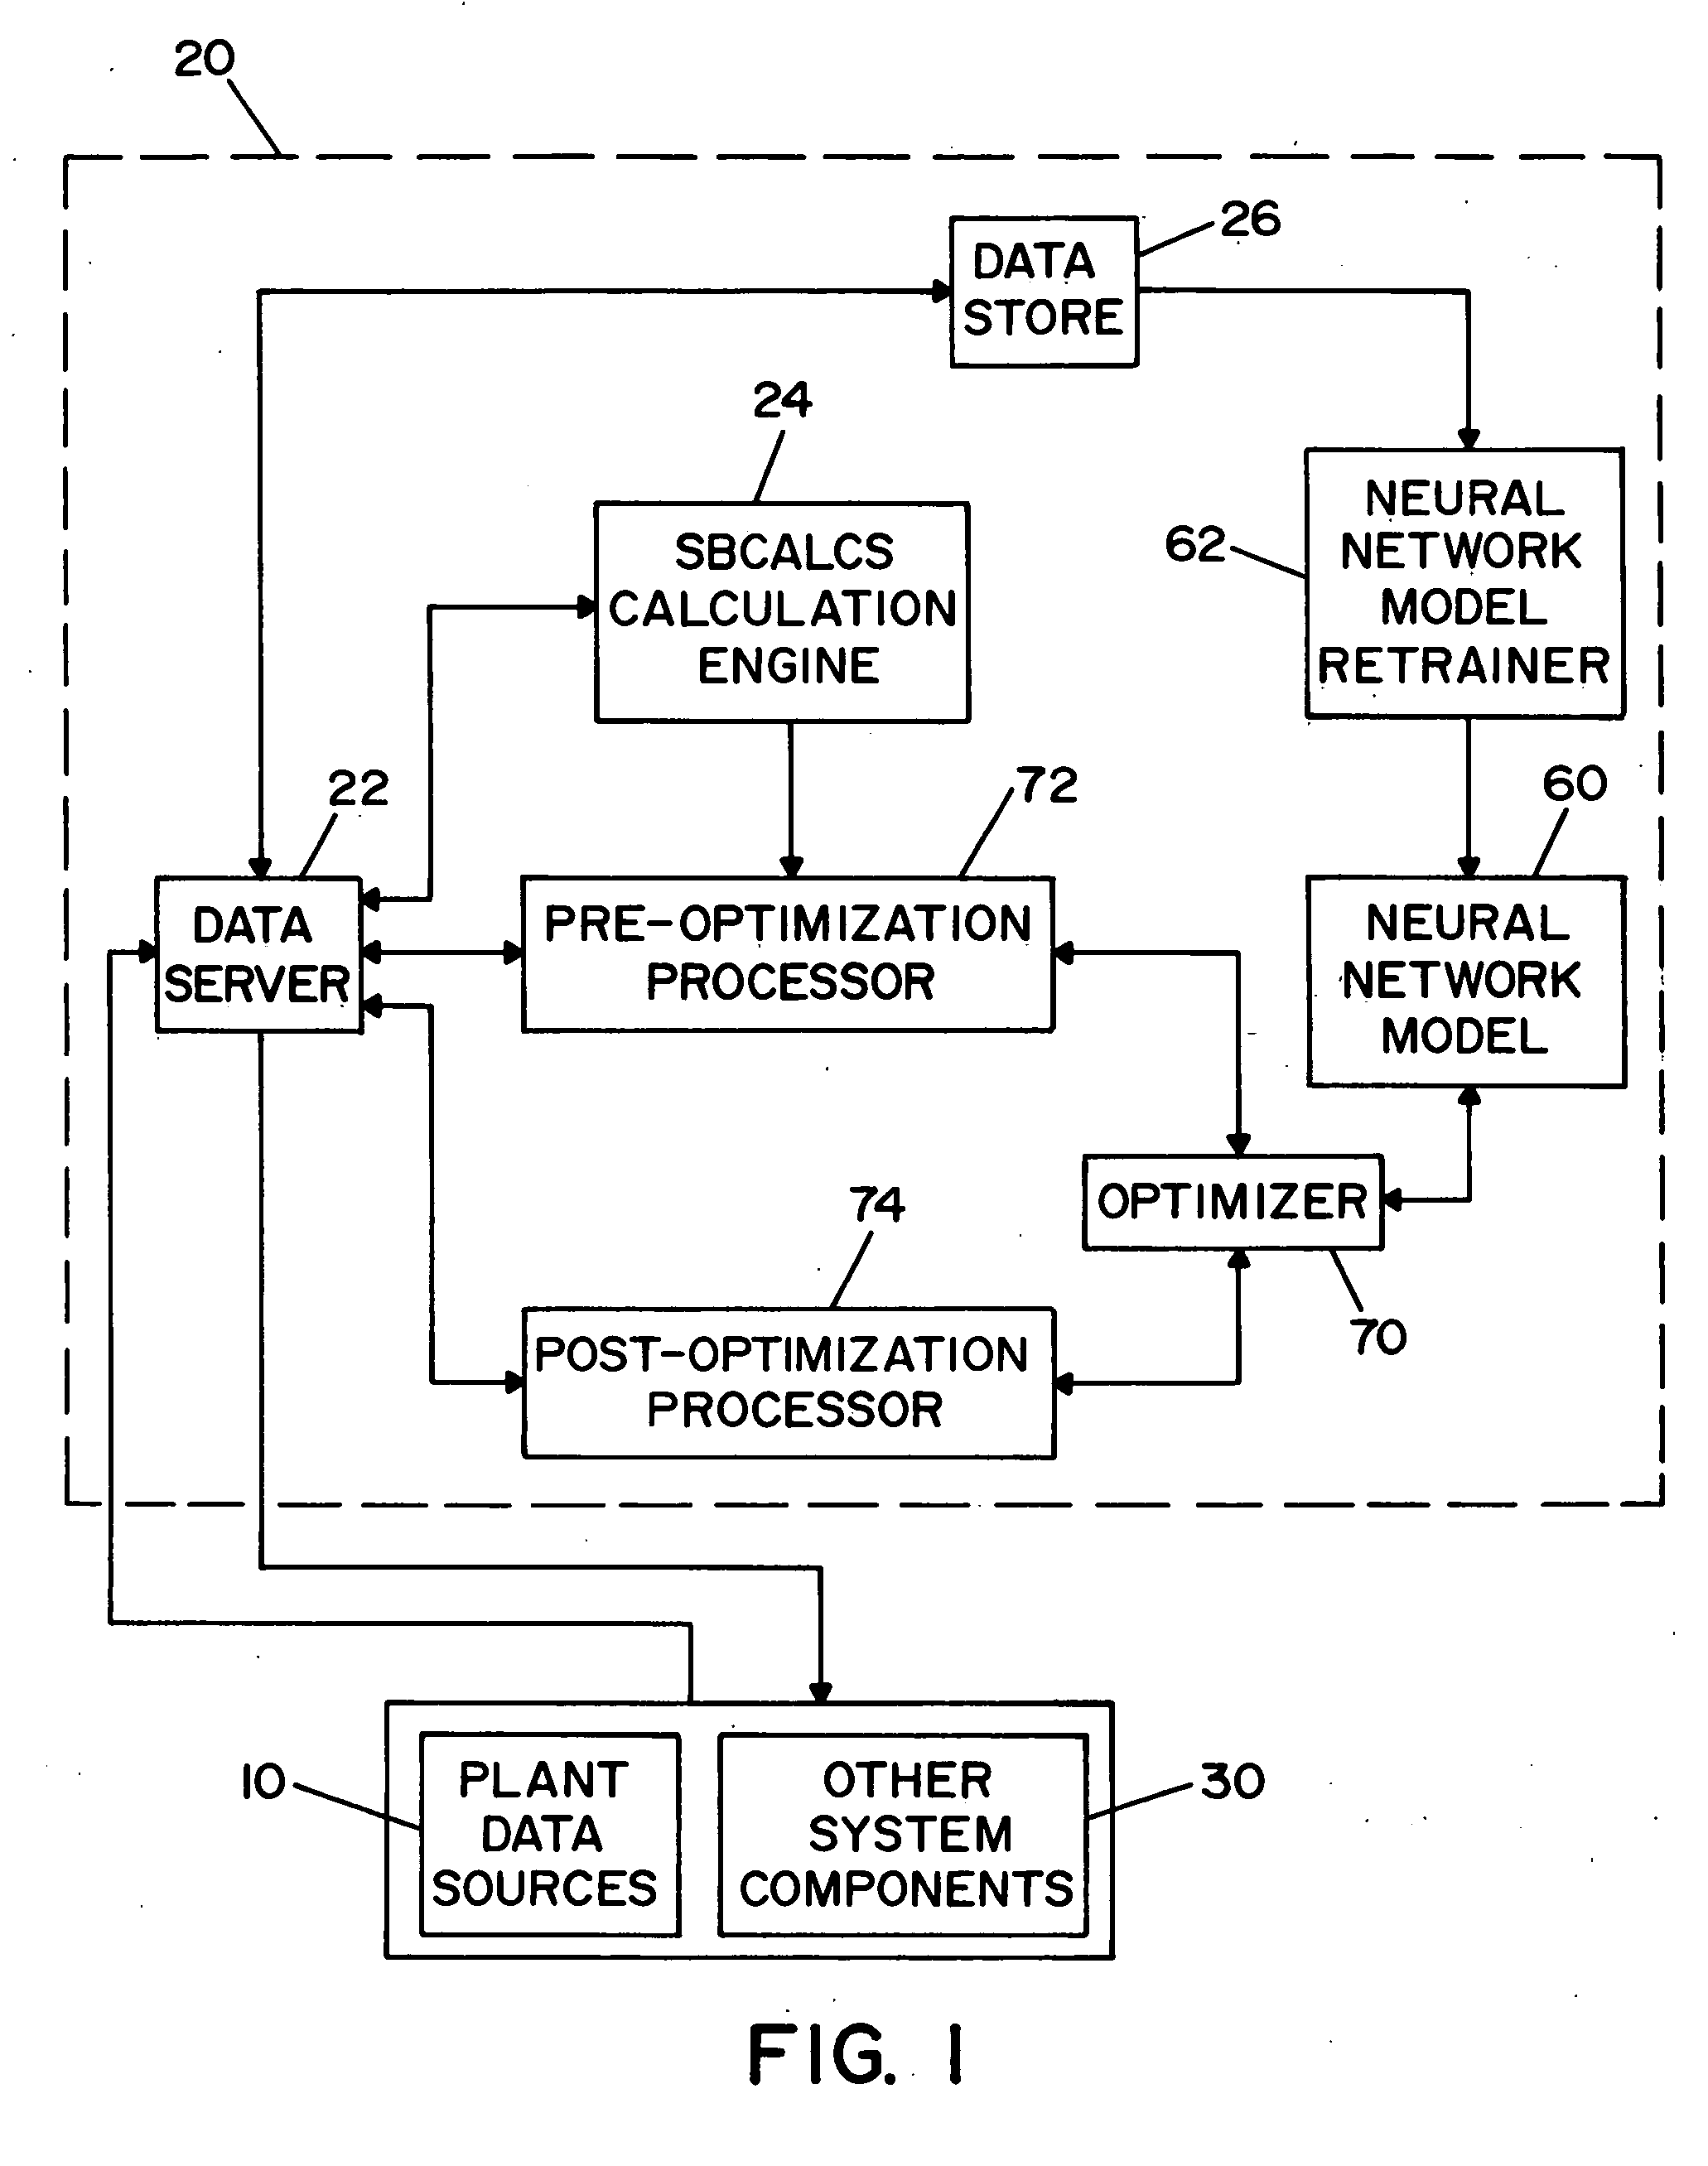 Method and apparatus for optimizing operation of a power generating plant using artificial intelligence techniques